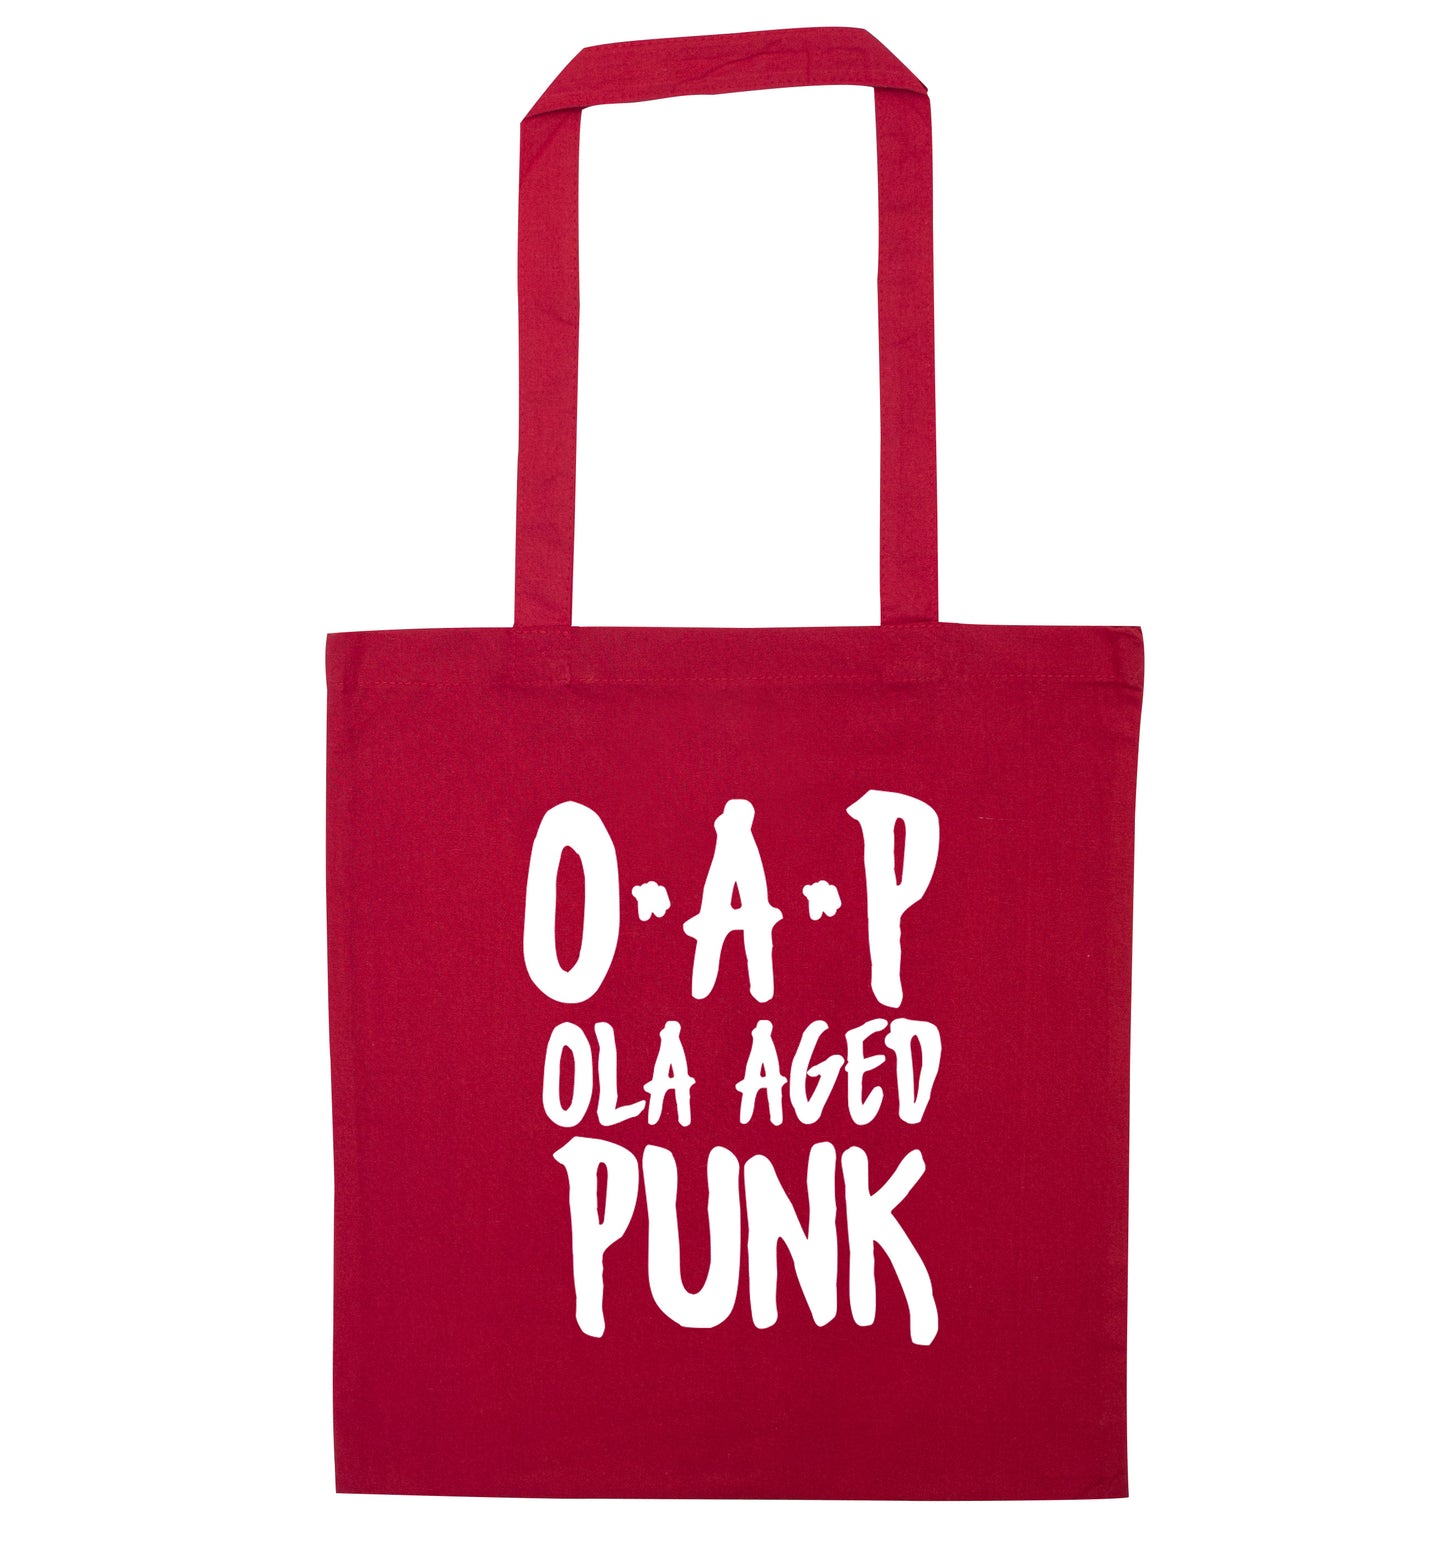 O.A.P Old Aged Punk red tote bag